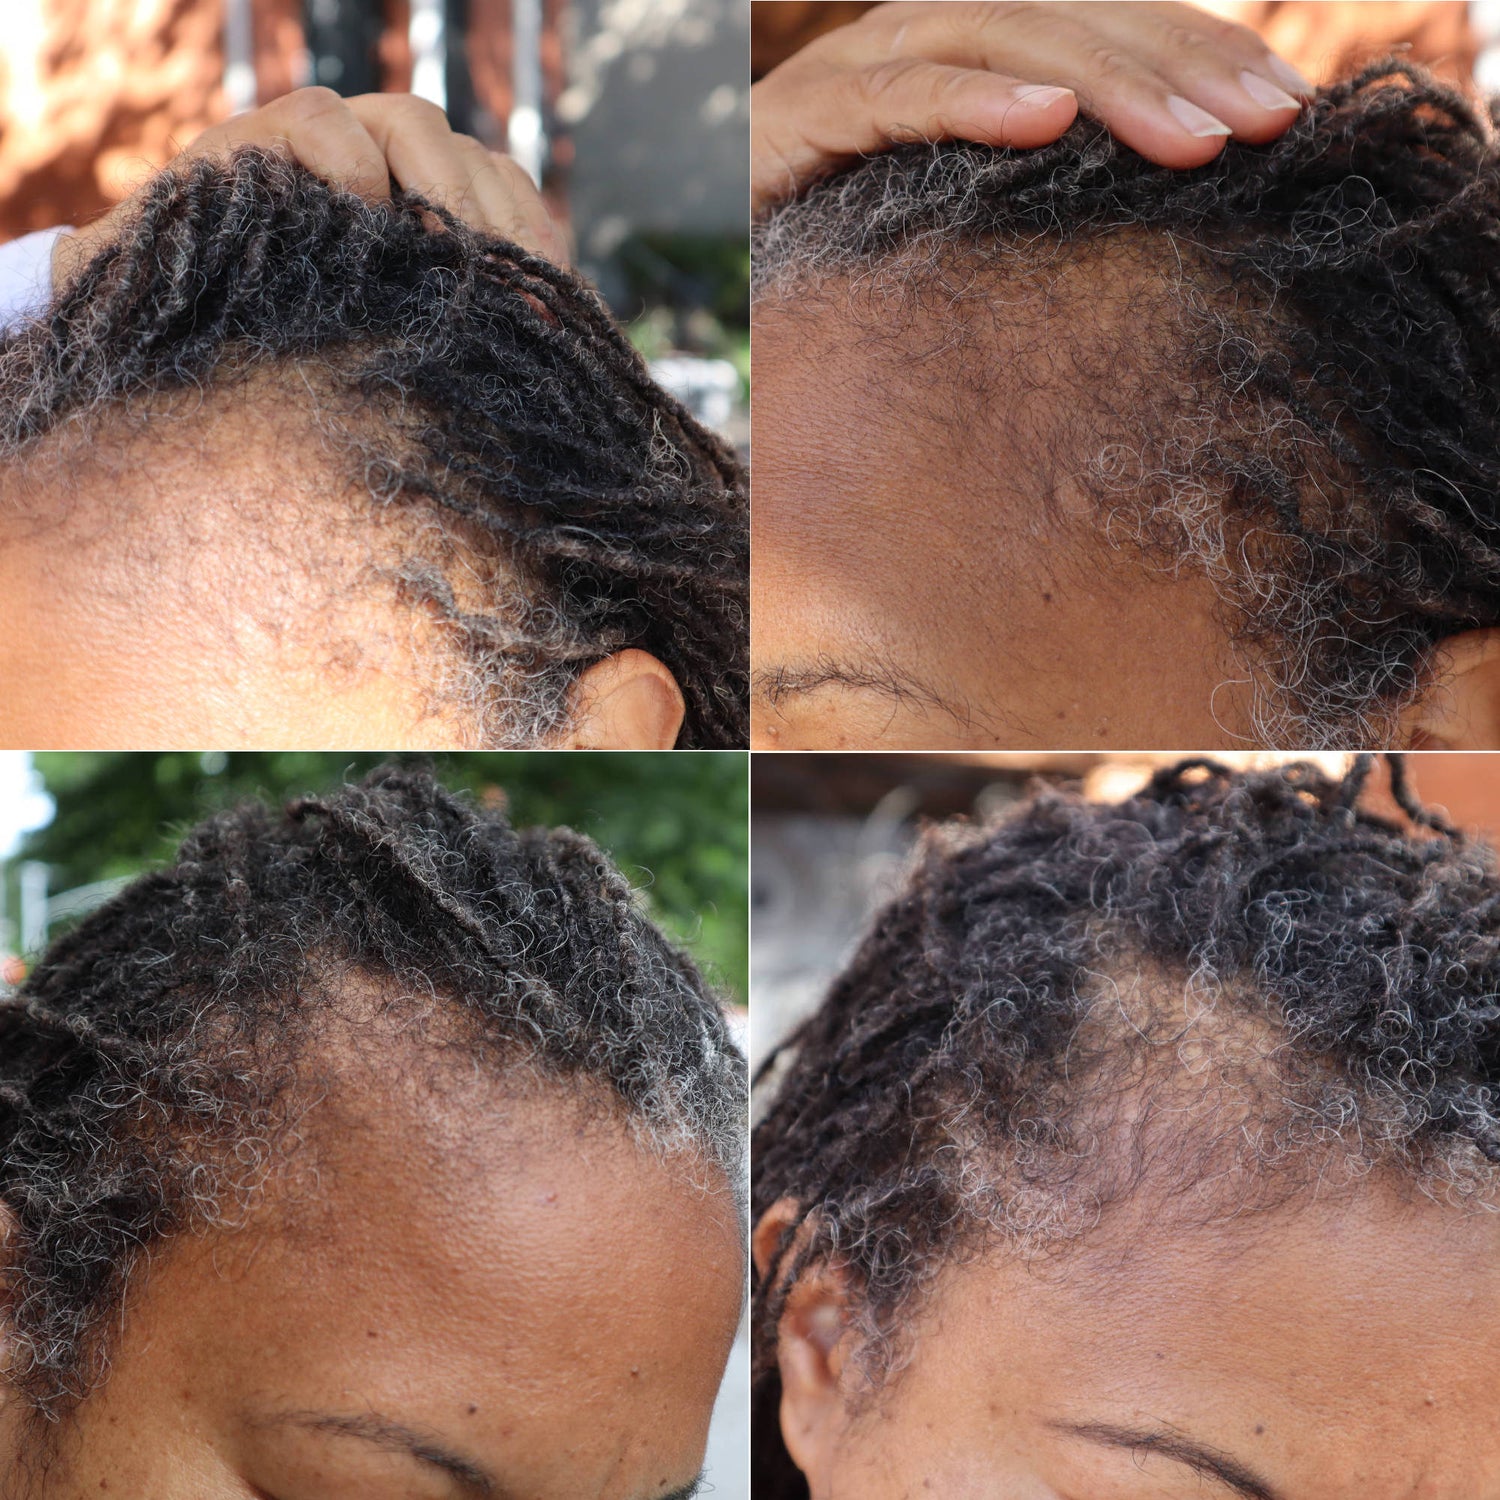 Hair Growth Tea to restore follicles and boost growth